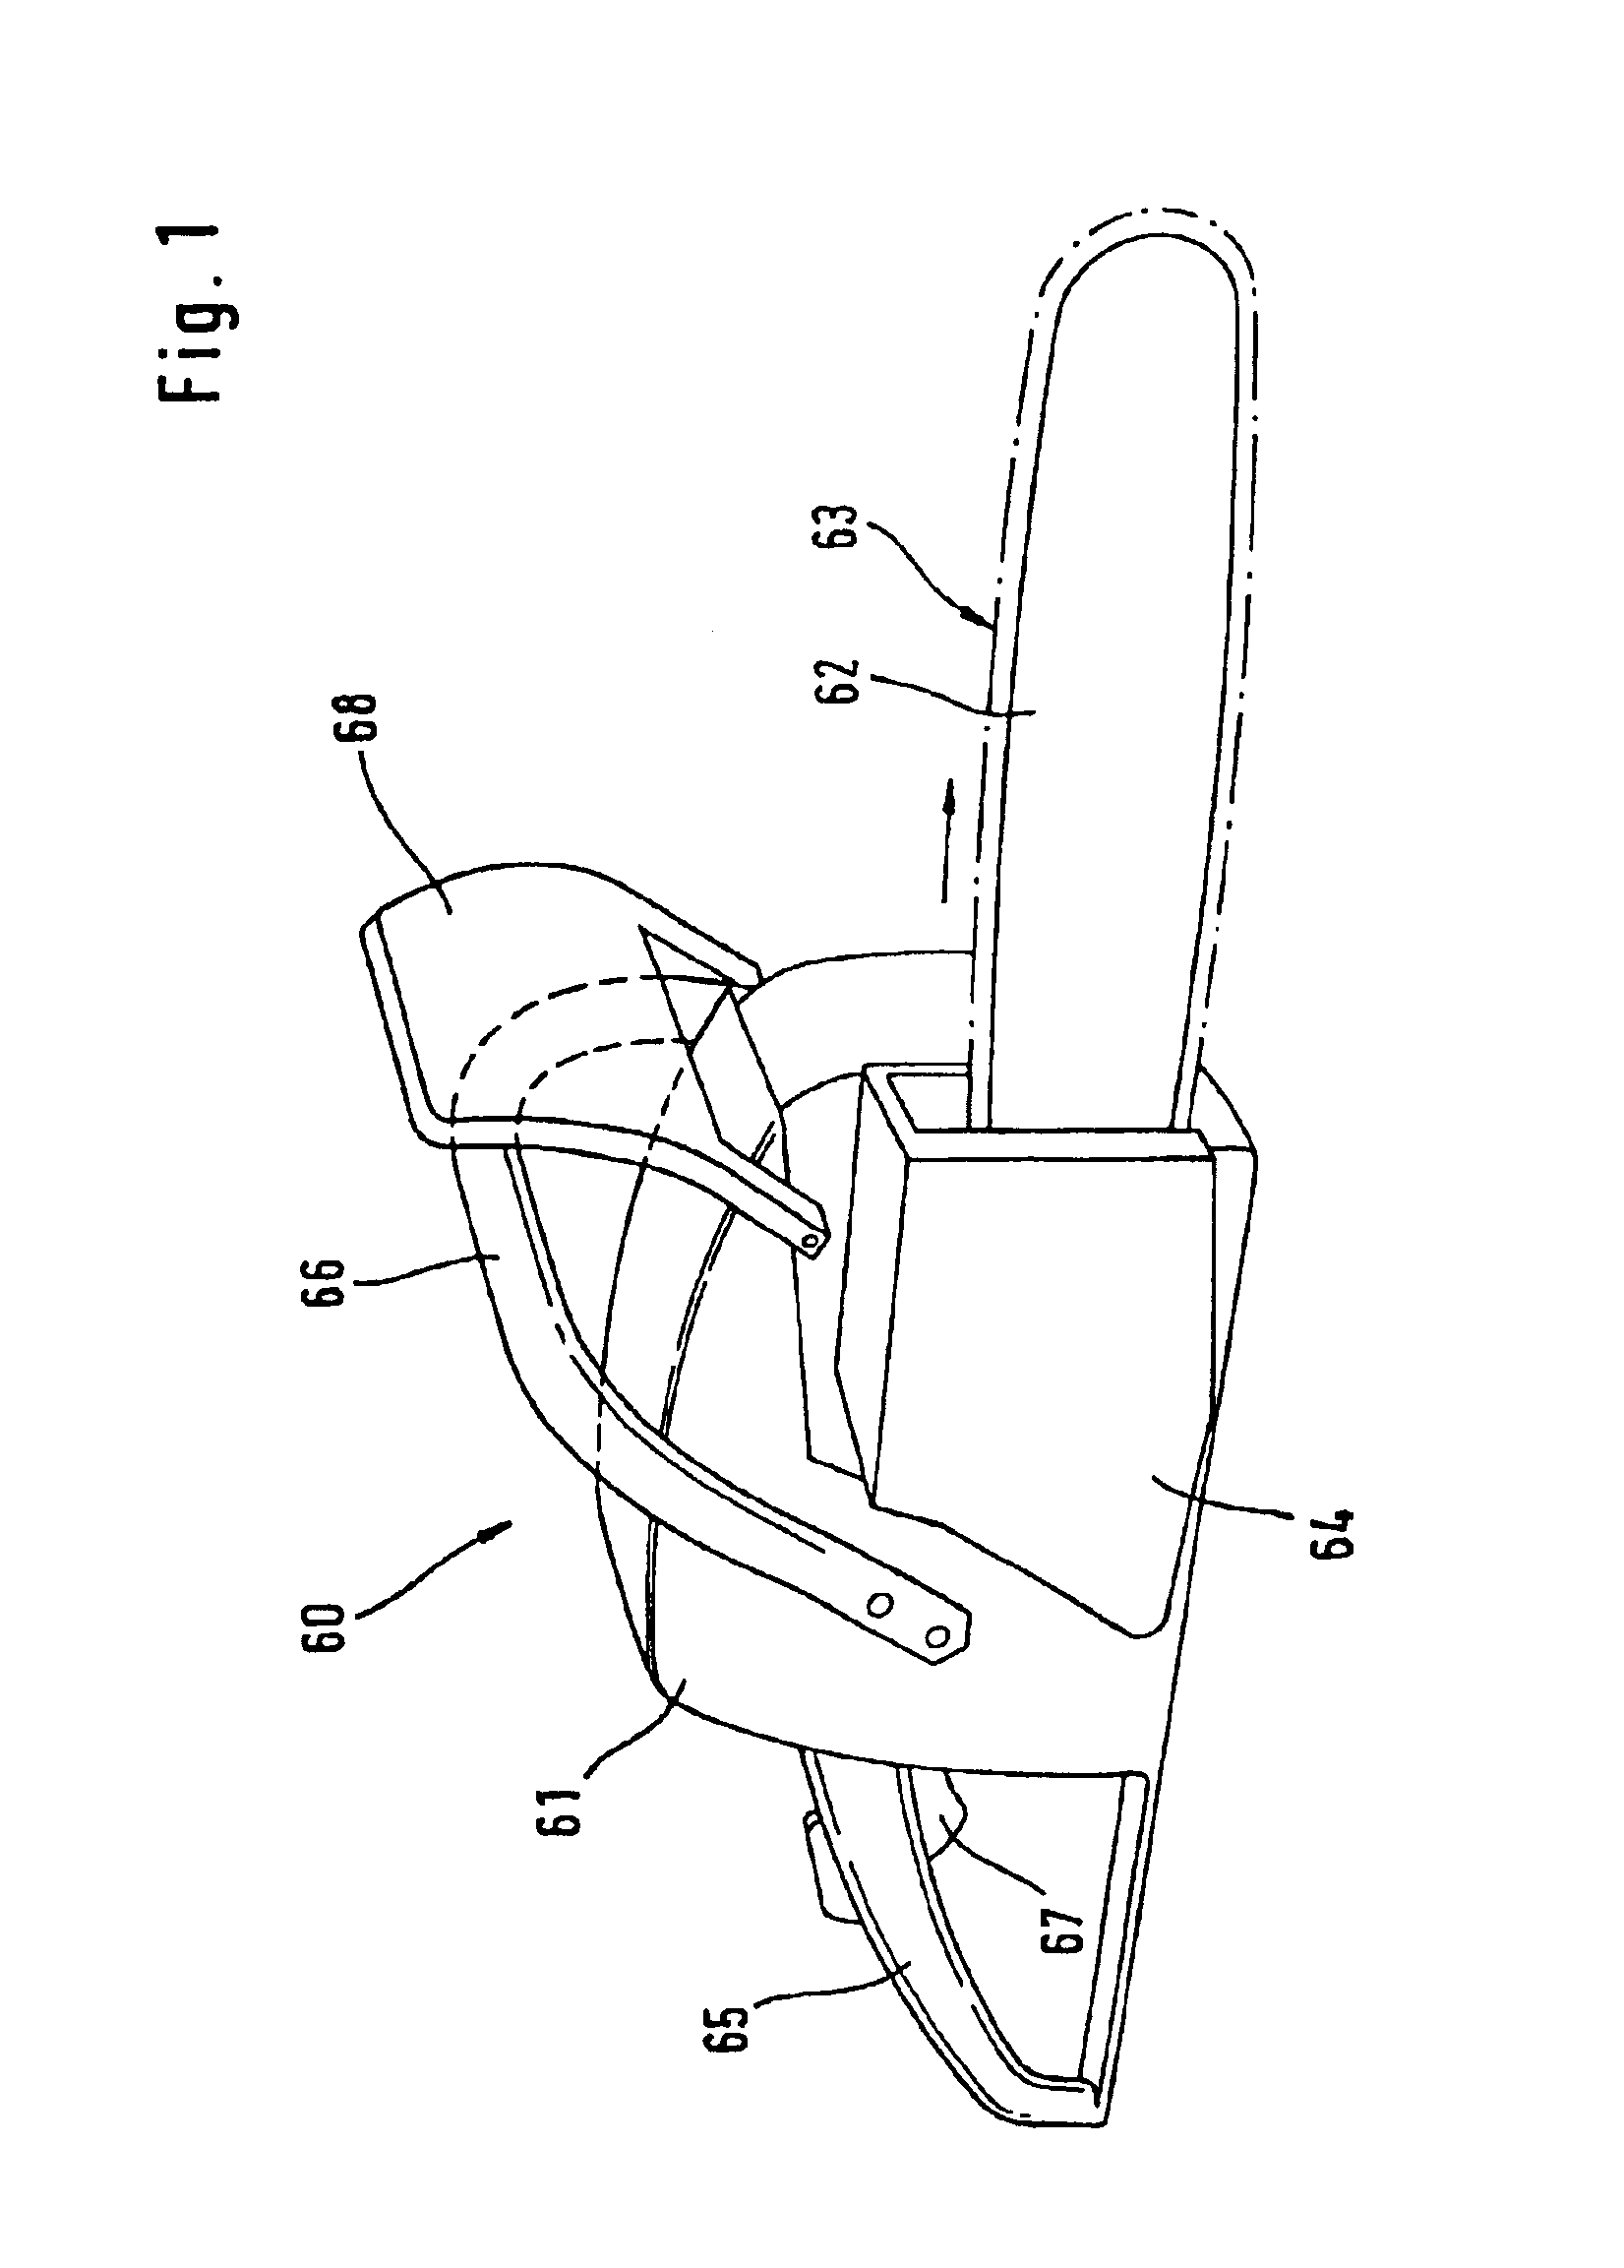 Method for operating a two-stroke engine having mixture induction